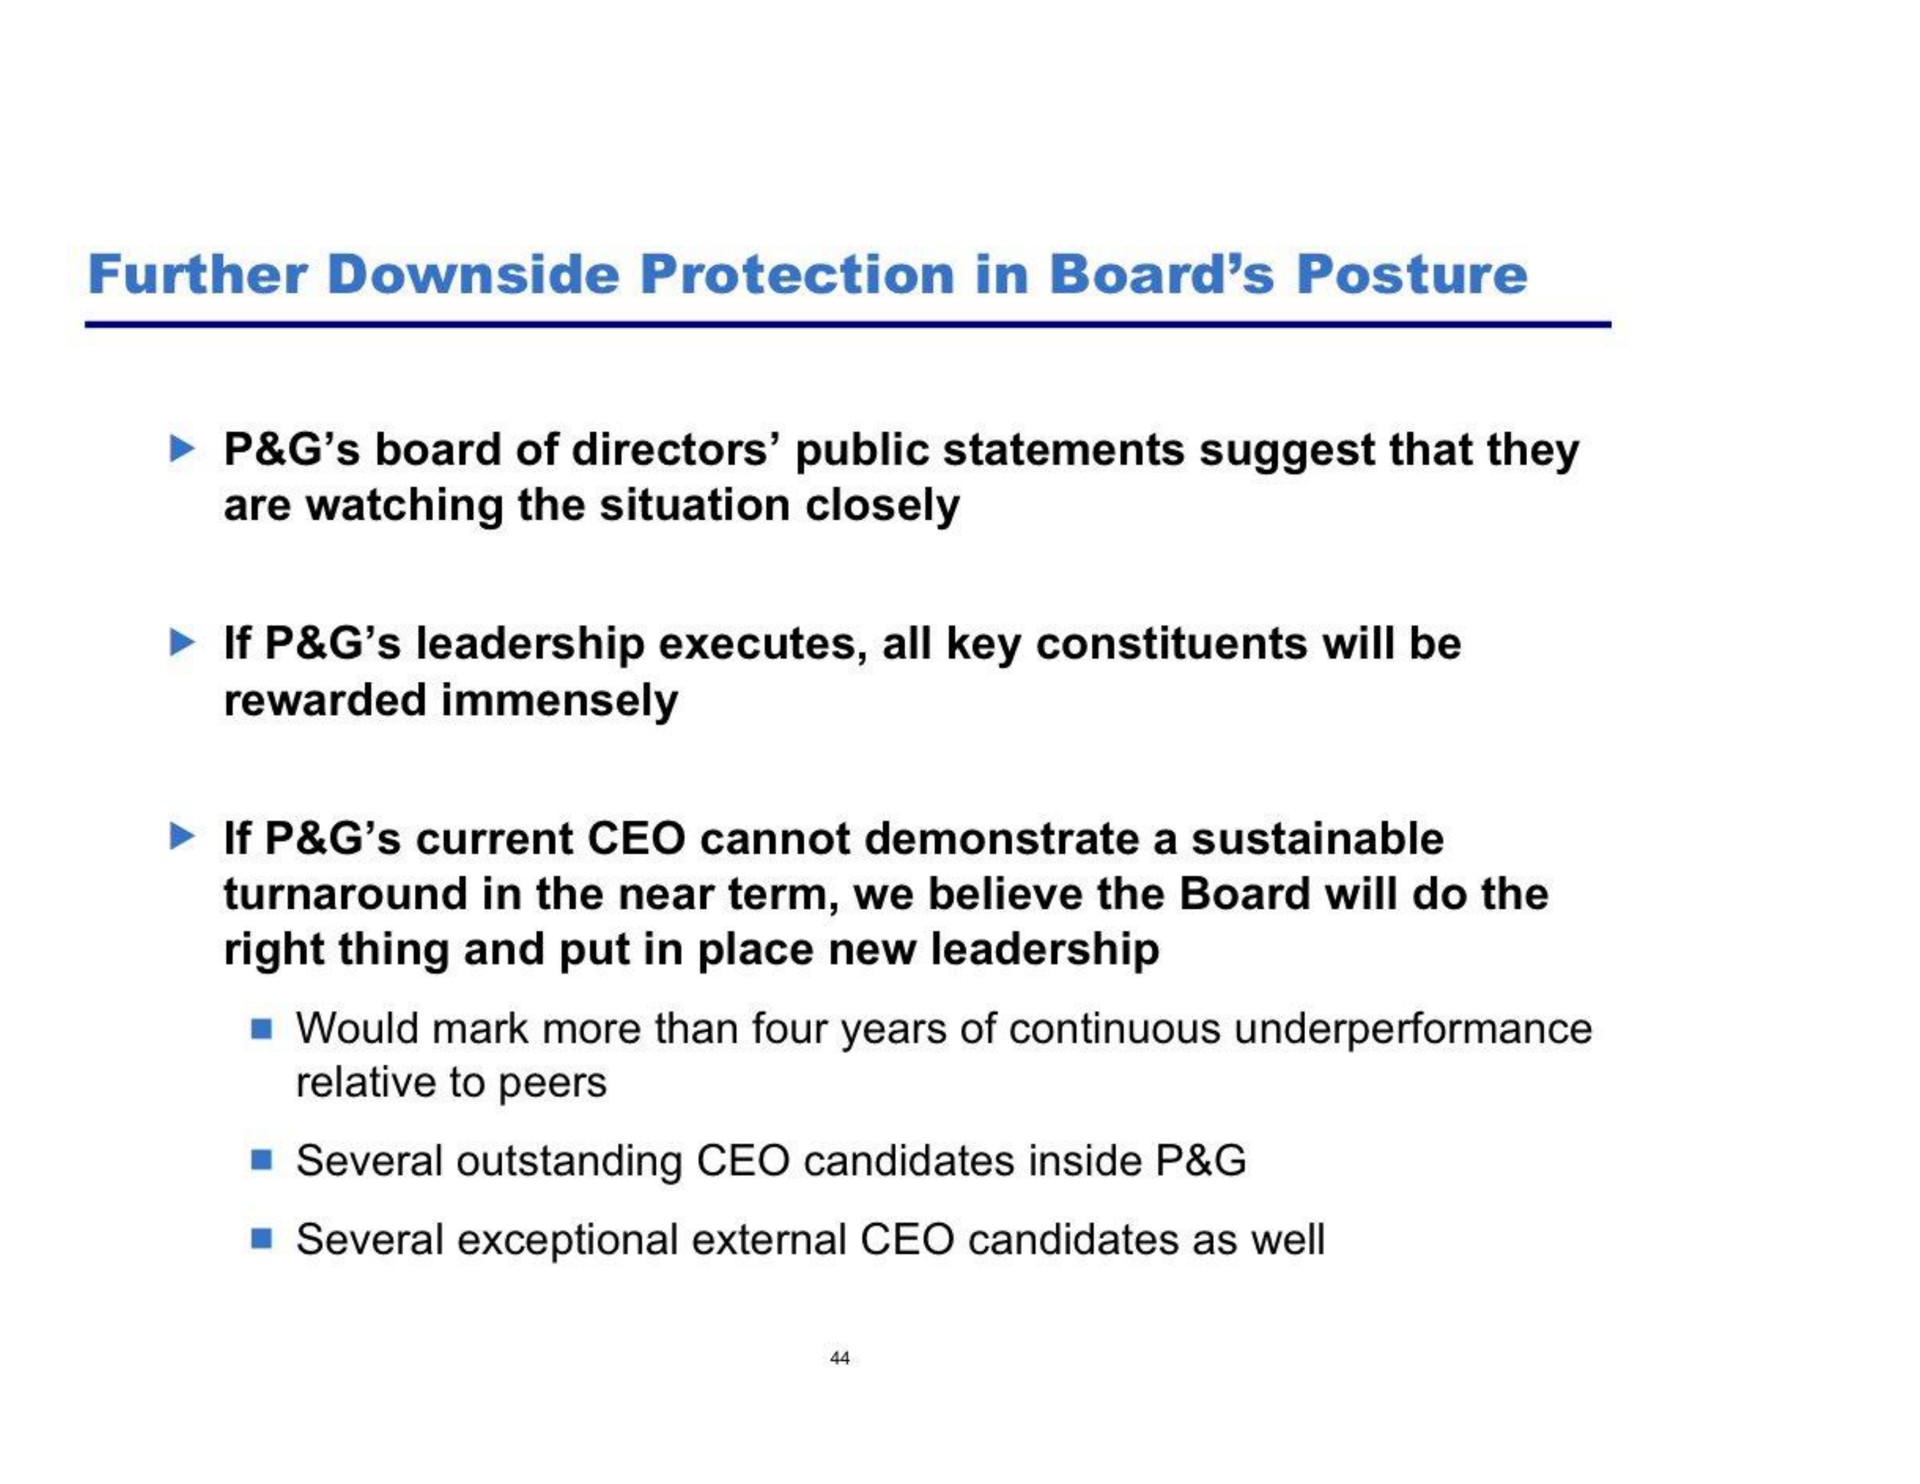 further downside protection in board posture board of directors public statements suggest that they are watching the situation closely if leadership executes all key constituents will be rewarded immensely right thing and put in place new leadership | Pershing Square